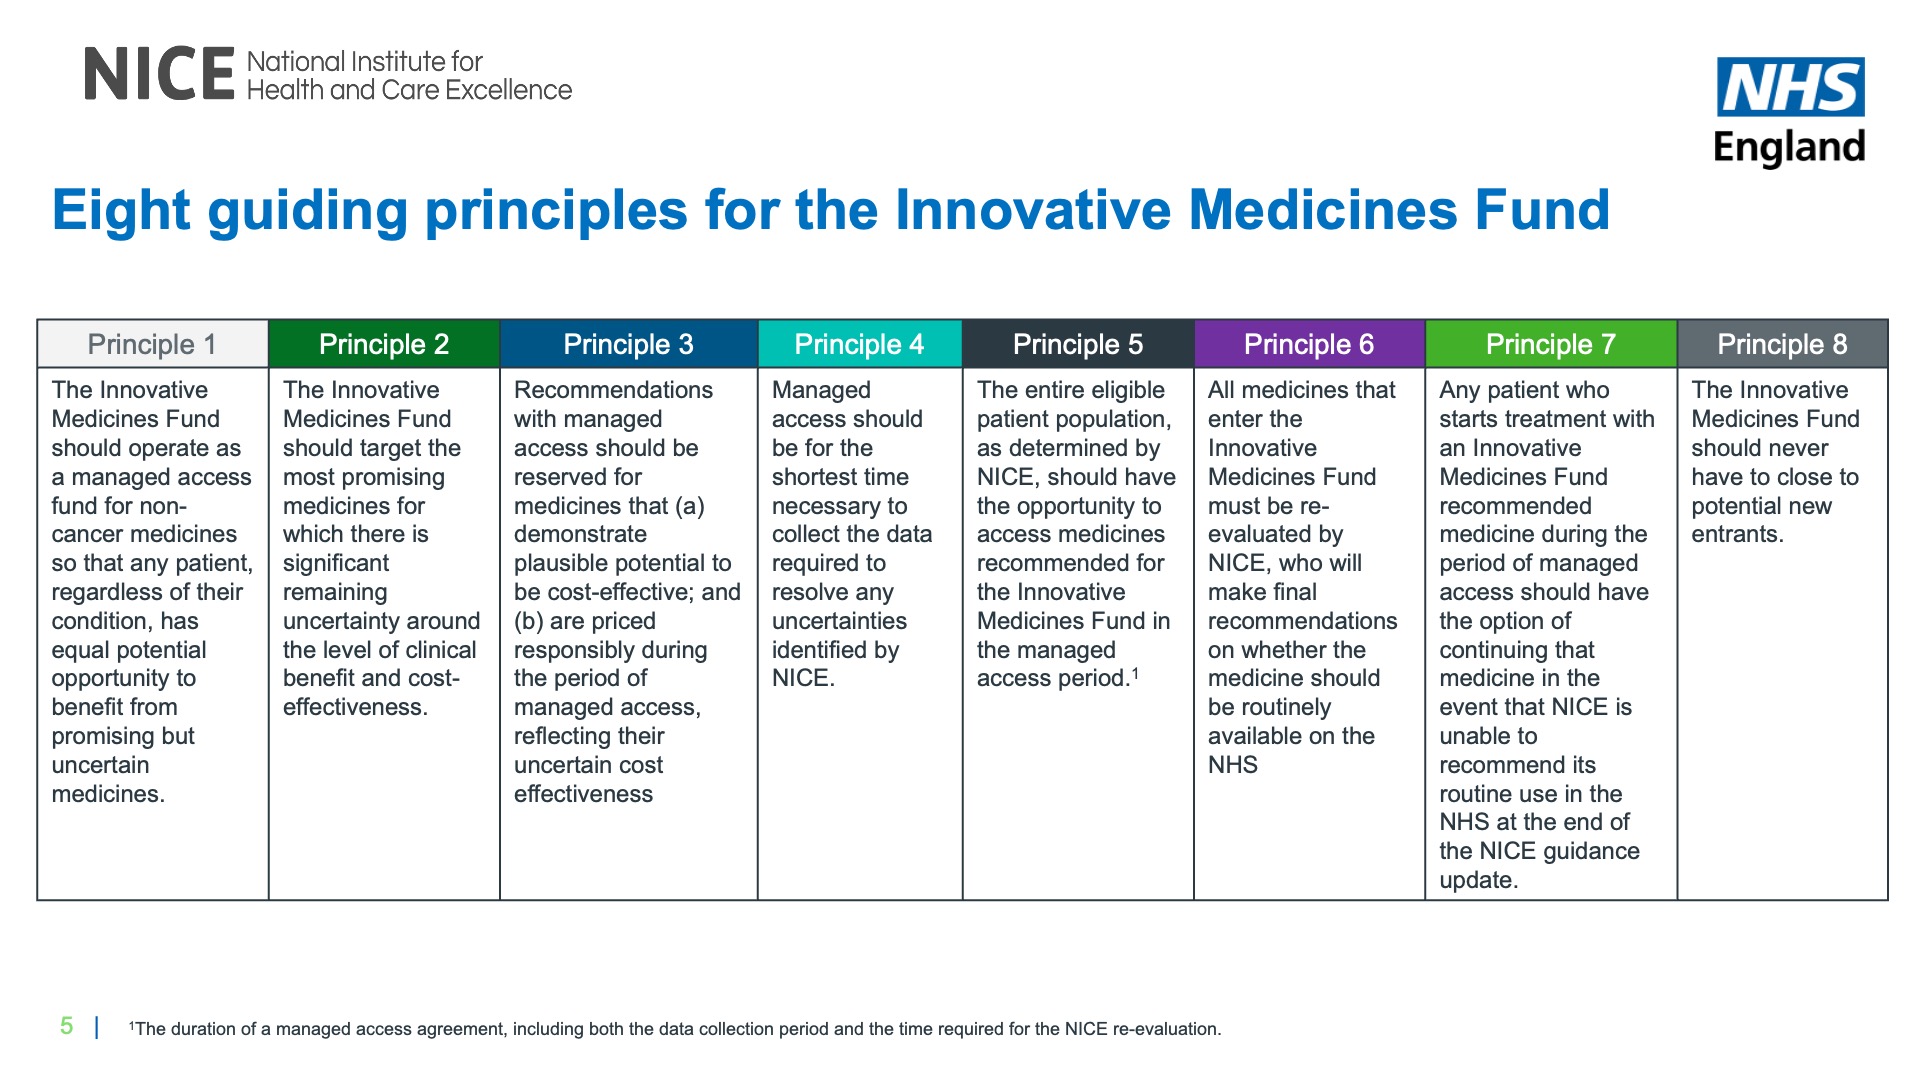 Eight principles for the Innovative Medicines Fund